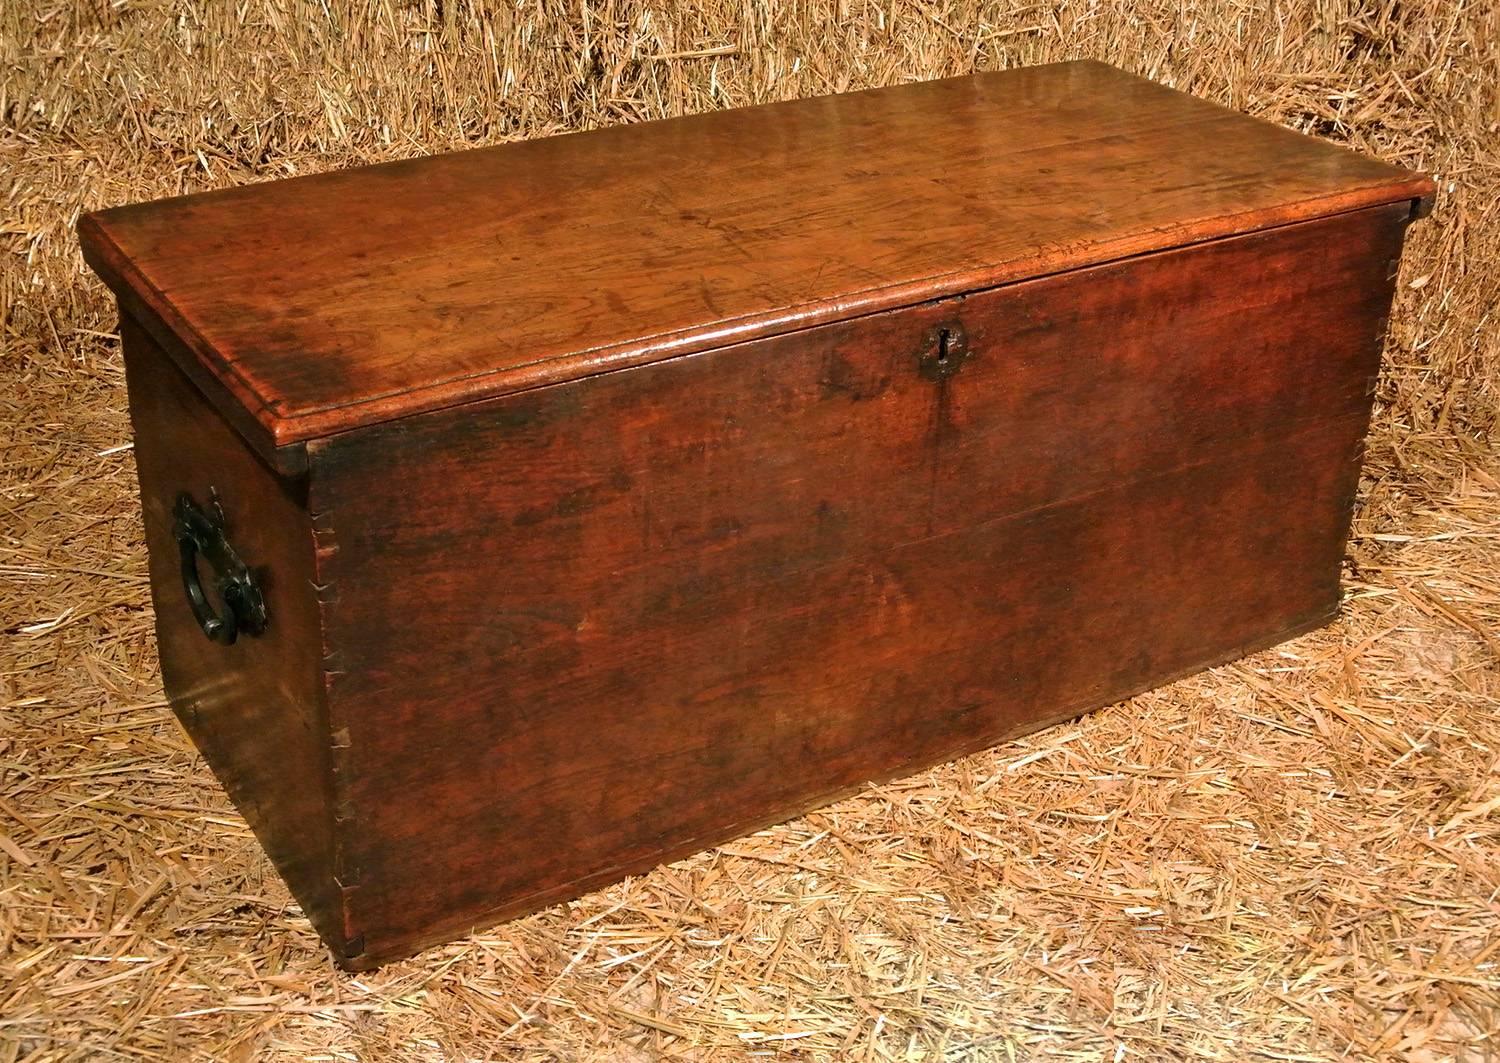 With a fabulous natural colour and good patination, a solid elm bed box c. 1690 with original rivetted iron strap hinges and attractive original iron carrying handles to sides.  Substantial dovetailed joints throughout.

Made to go at the end of a